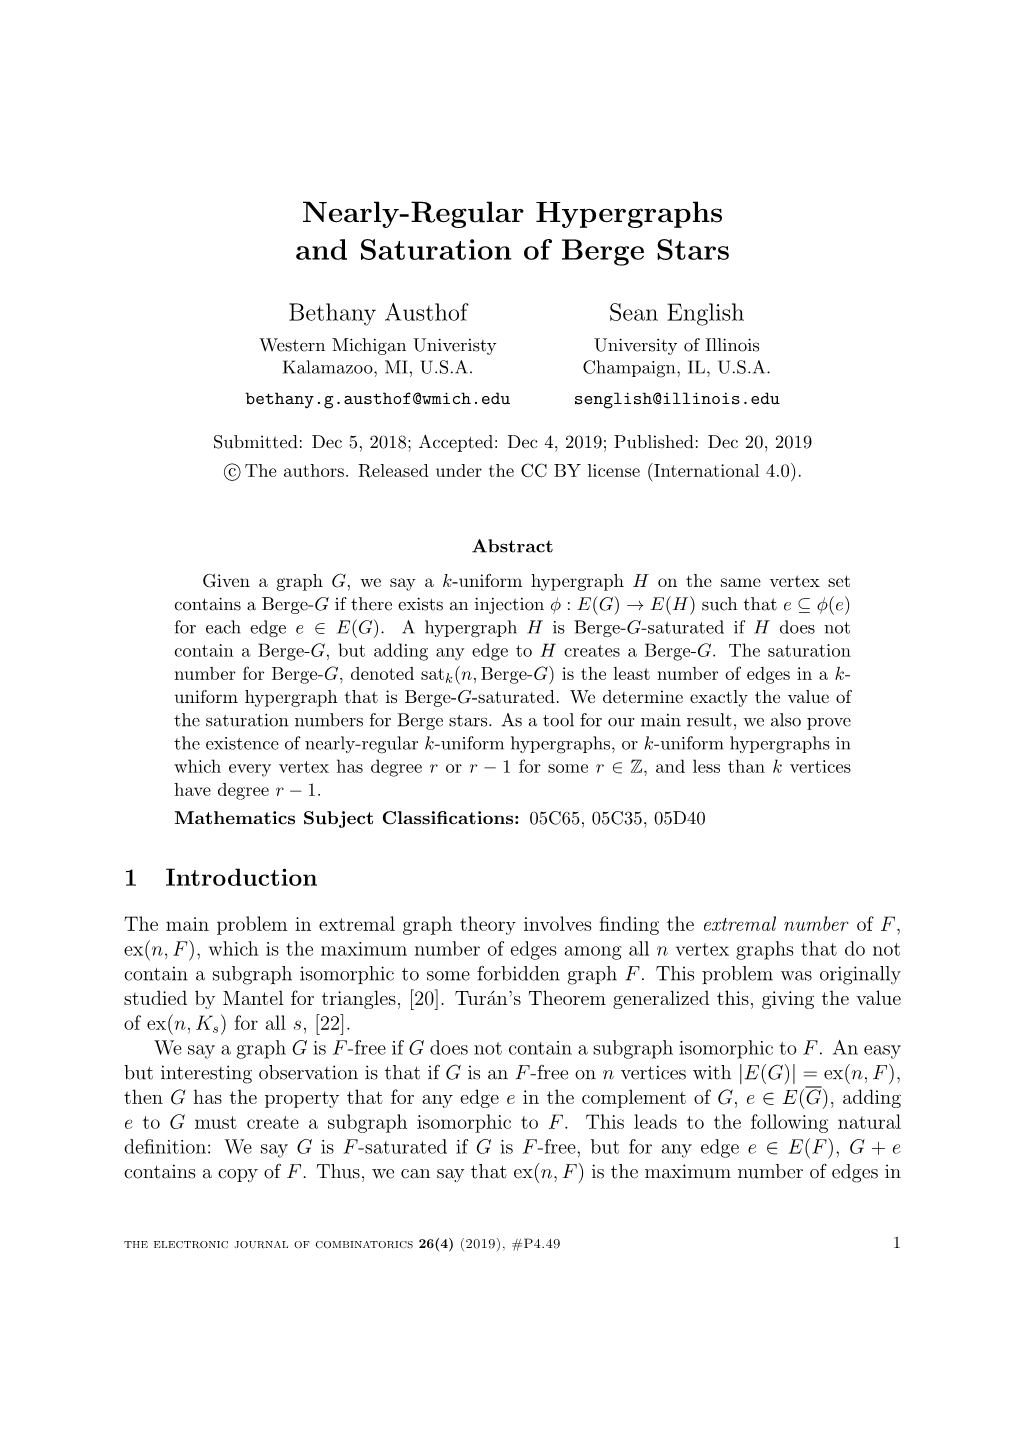 Nearly-Regular Hypergraphs and Saturation of Berge Stars